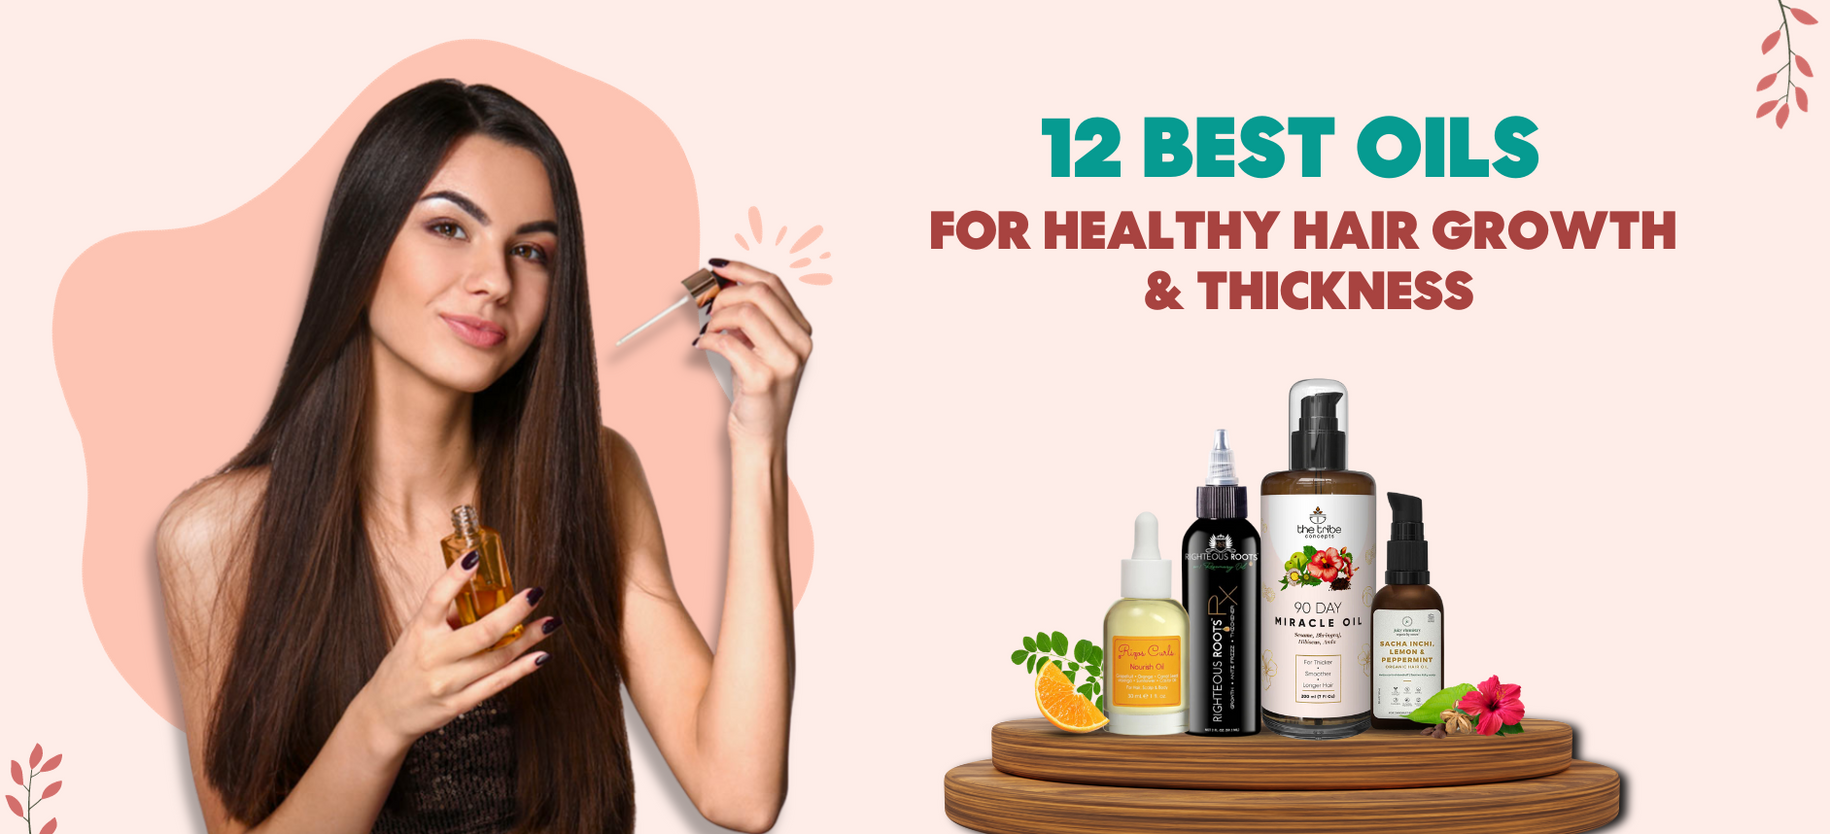 12 Best Oils For Healthy Hair Growth & Thickness